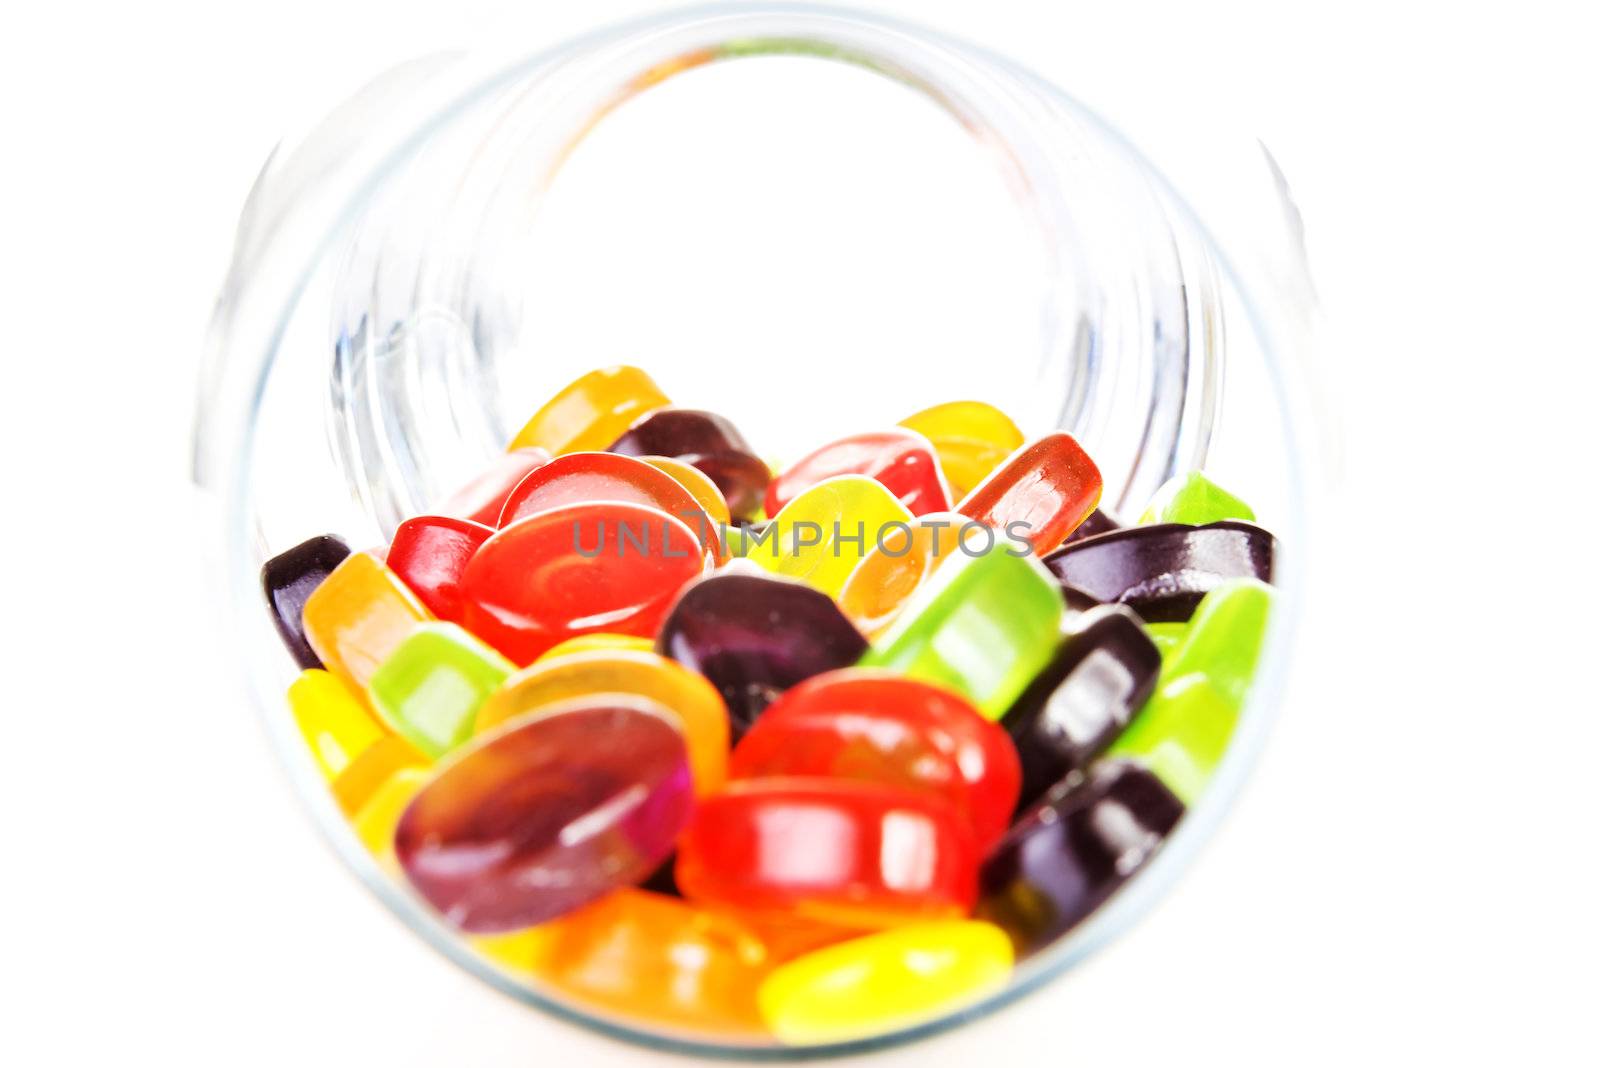 Candies isoalted on white